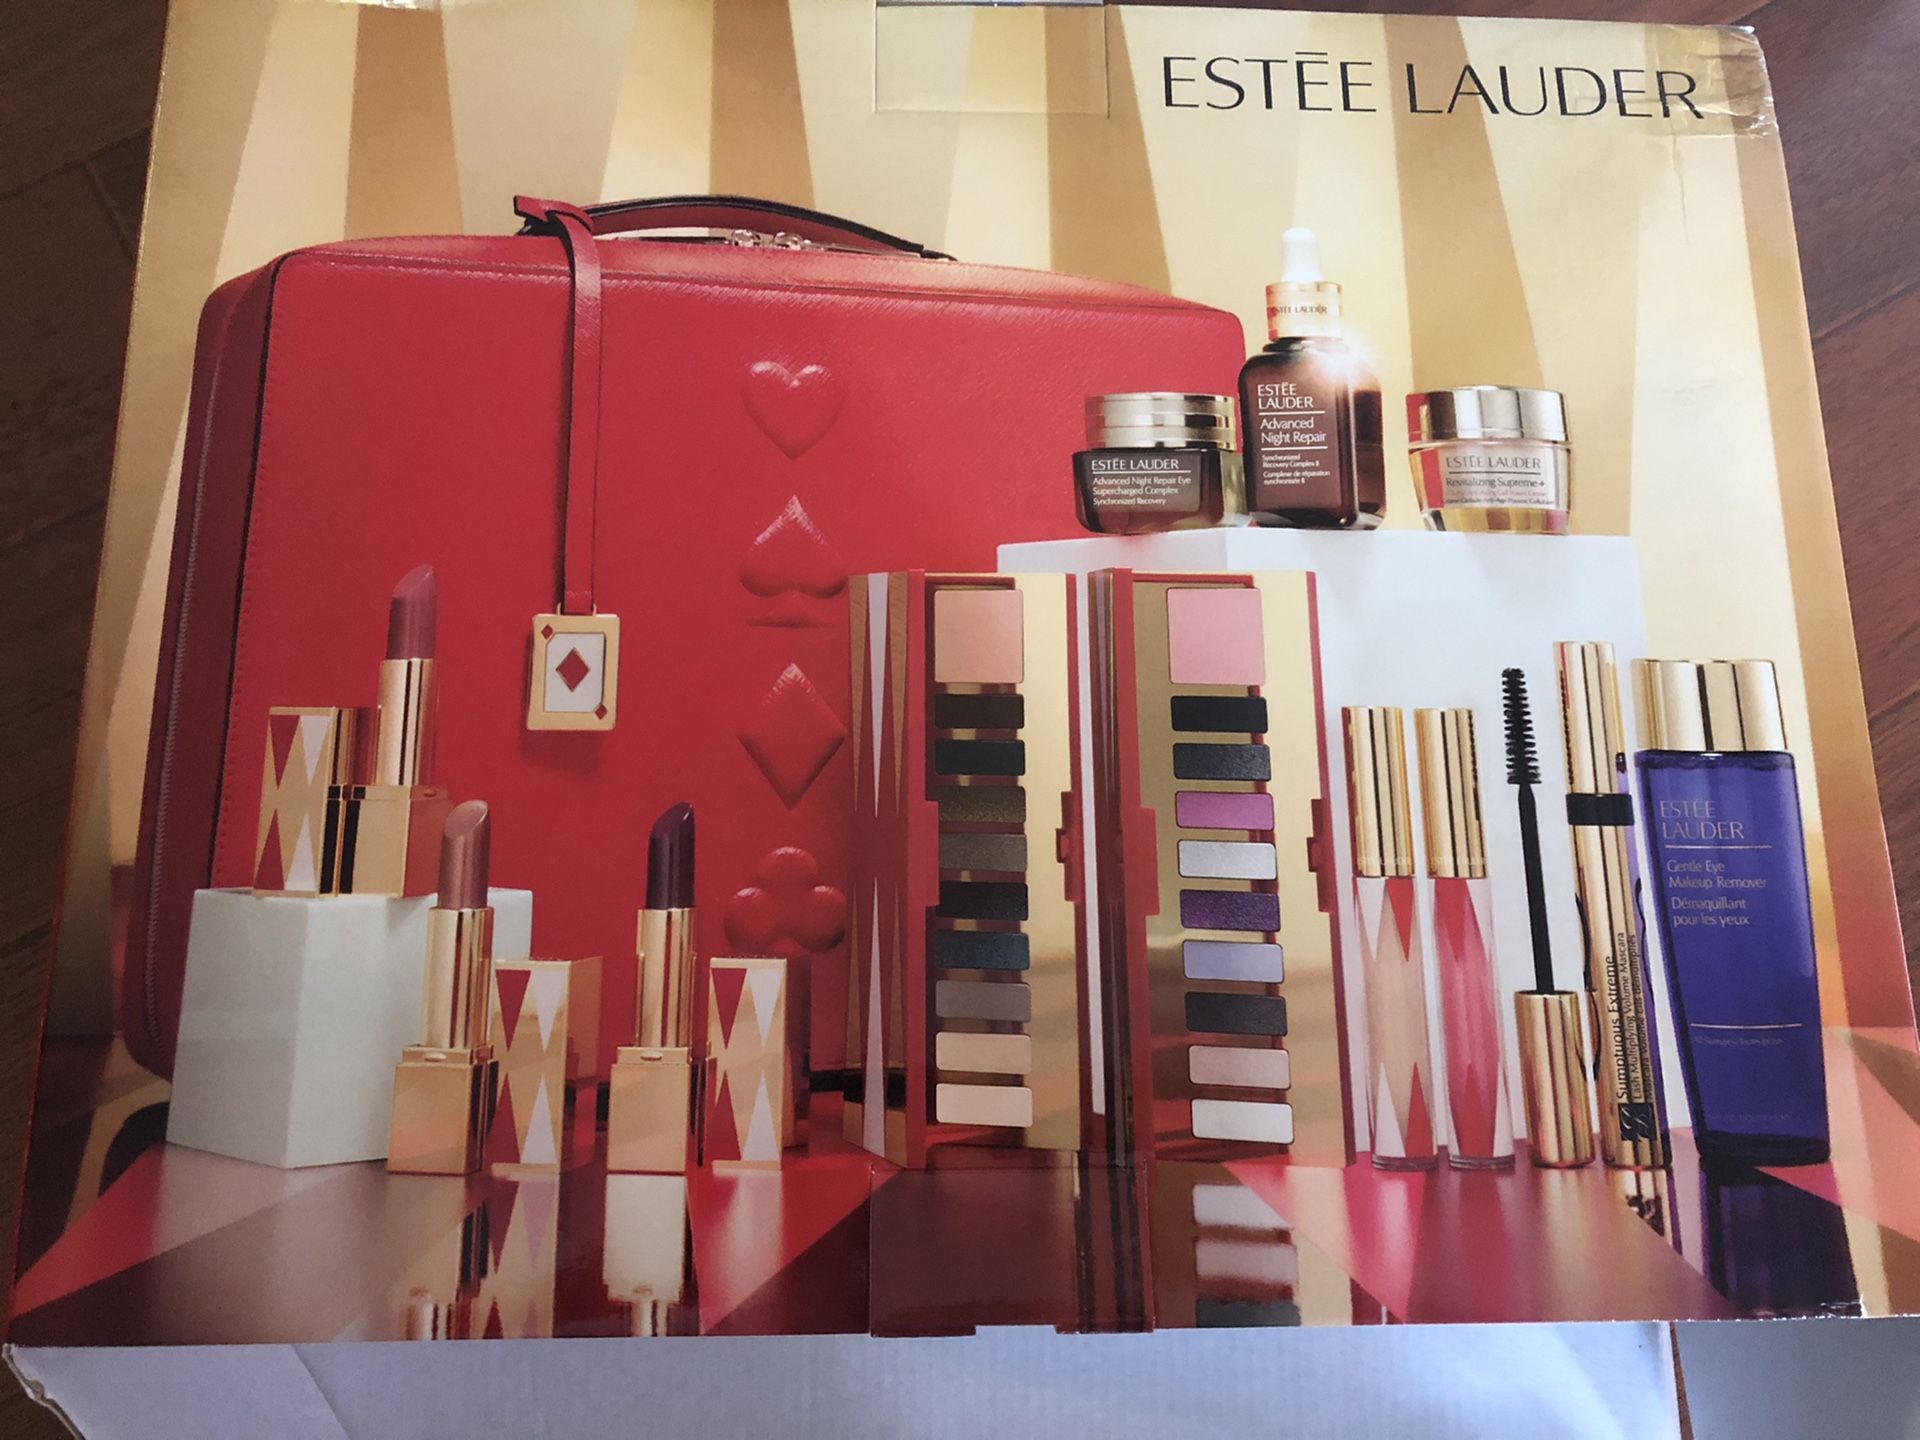 Estee Lauder gift box with beauty